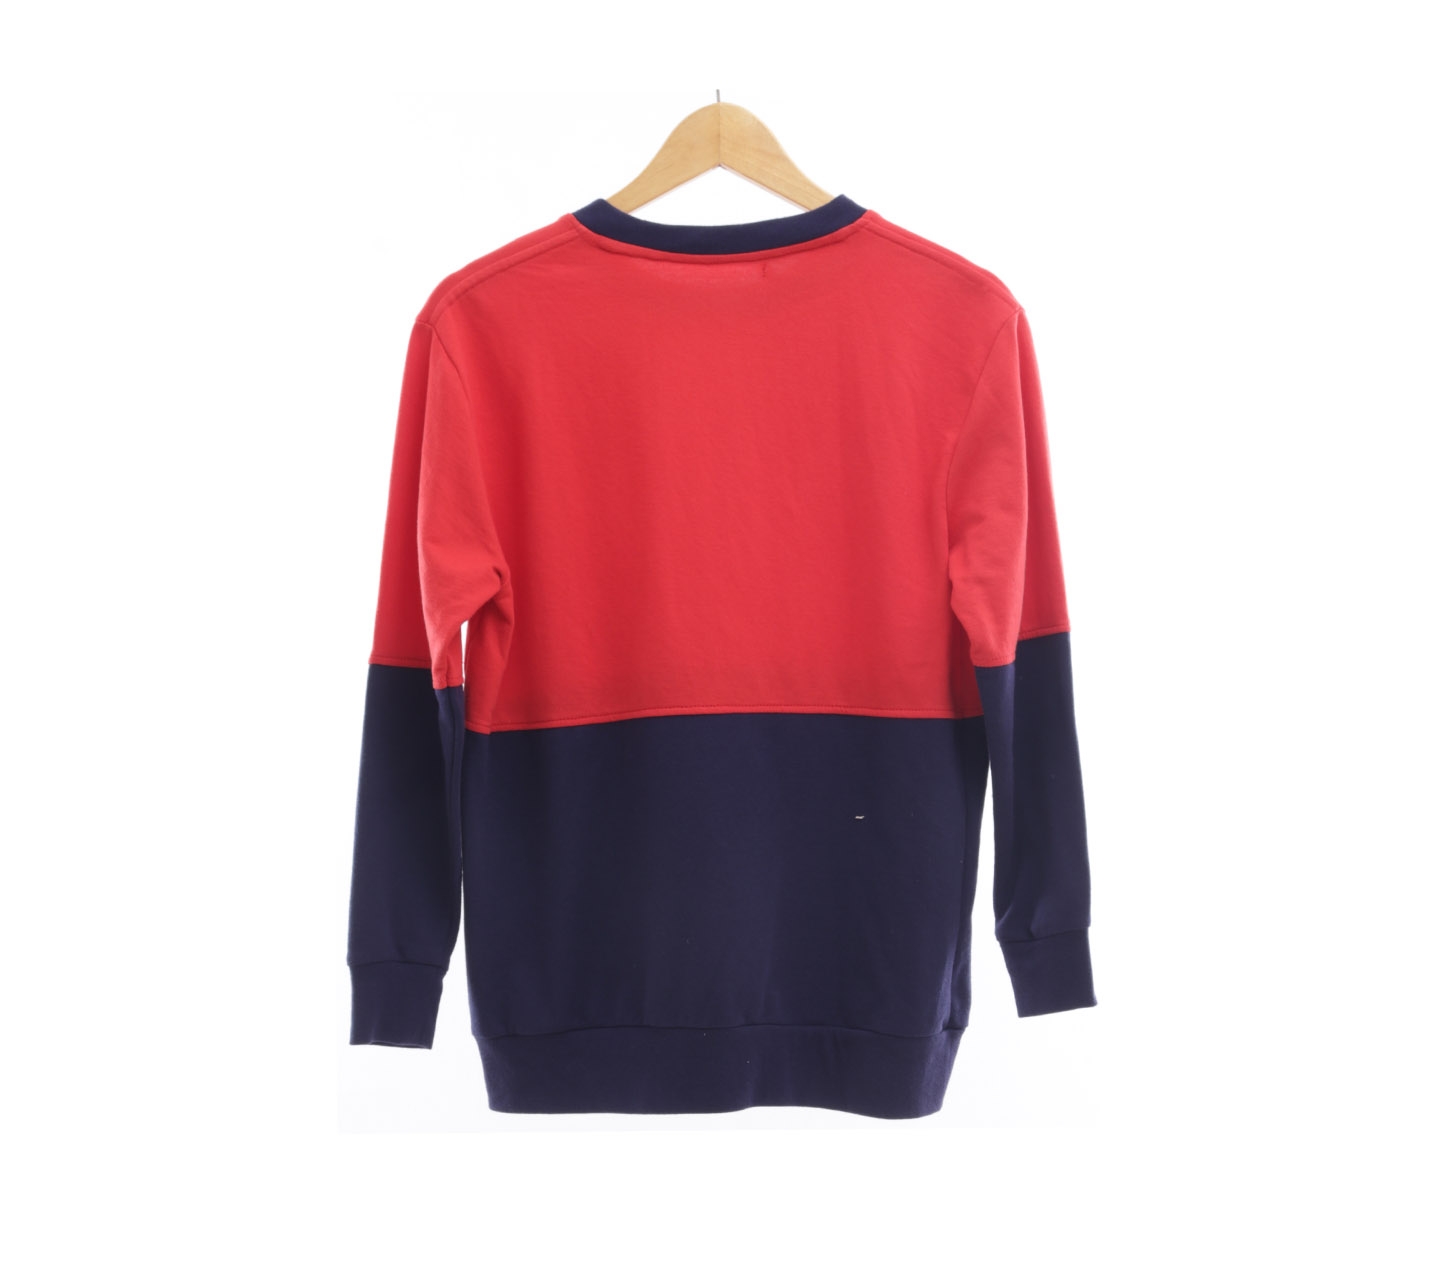 Hush Puppies Red & Navy Blouse